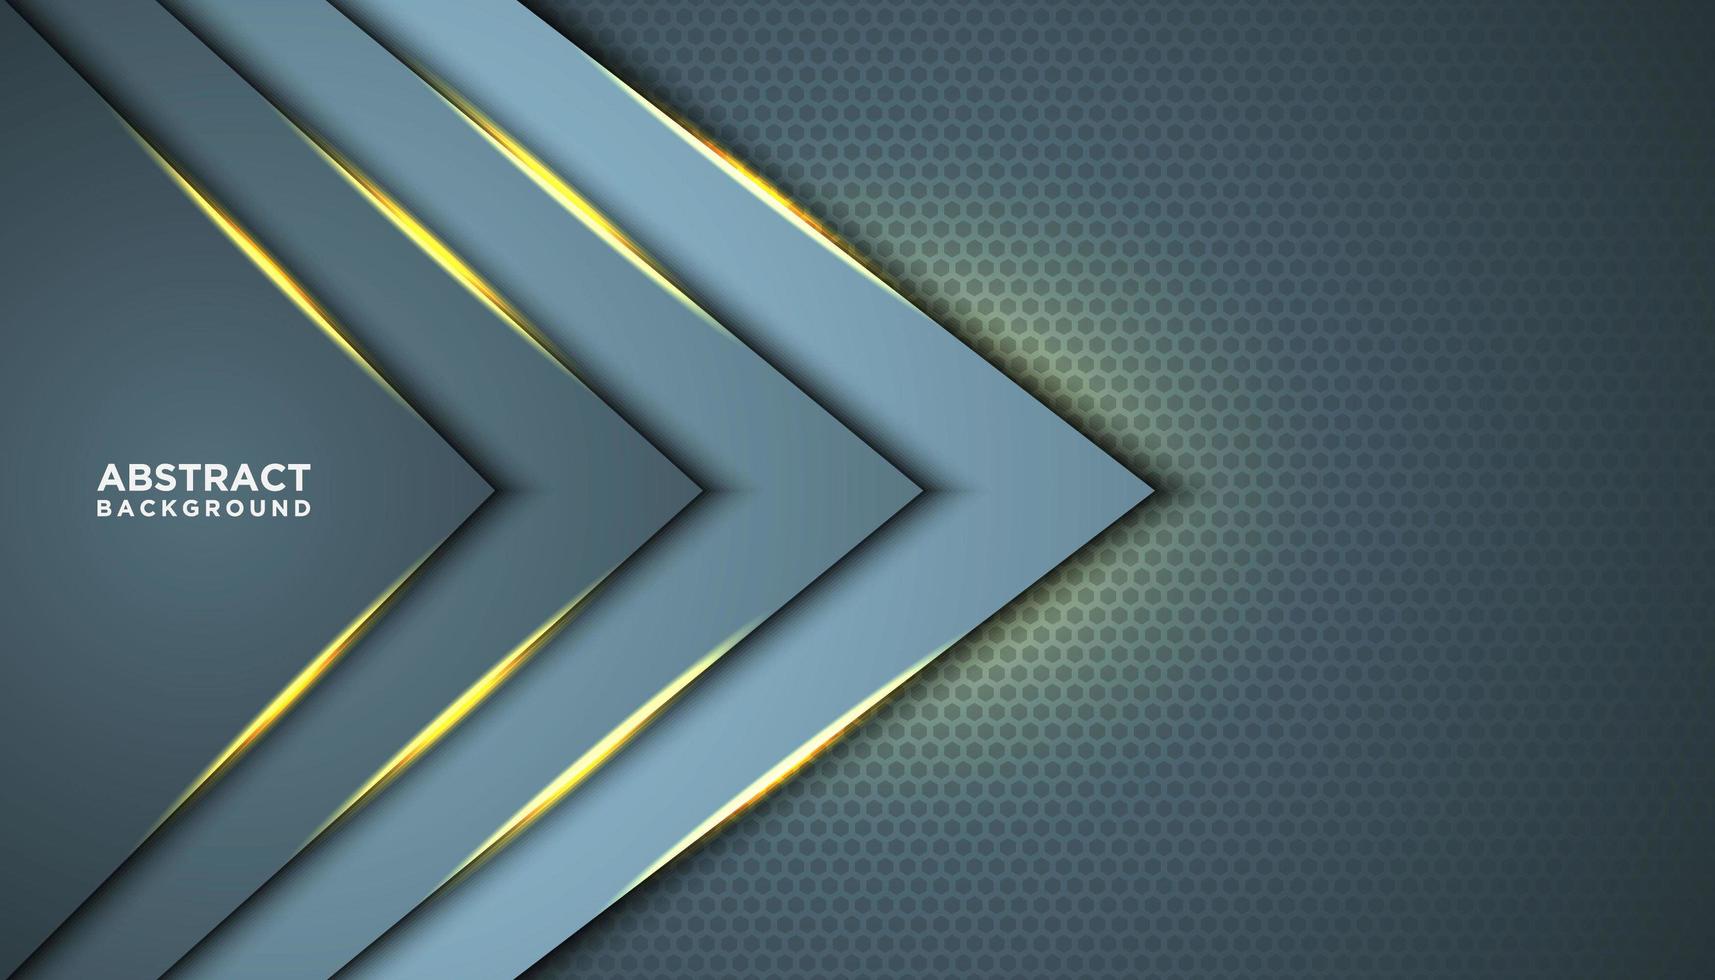 Abstract Triangle Background with Shiny Layers vector